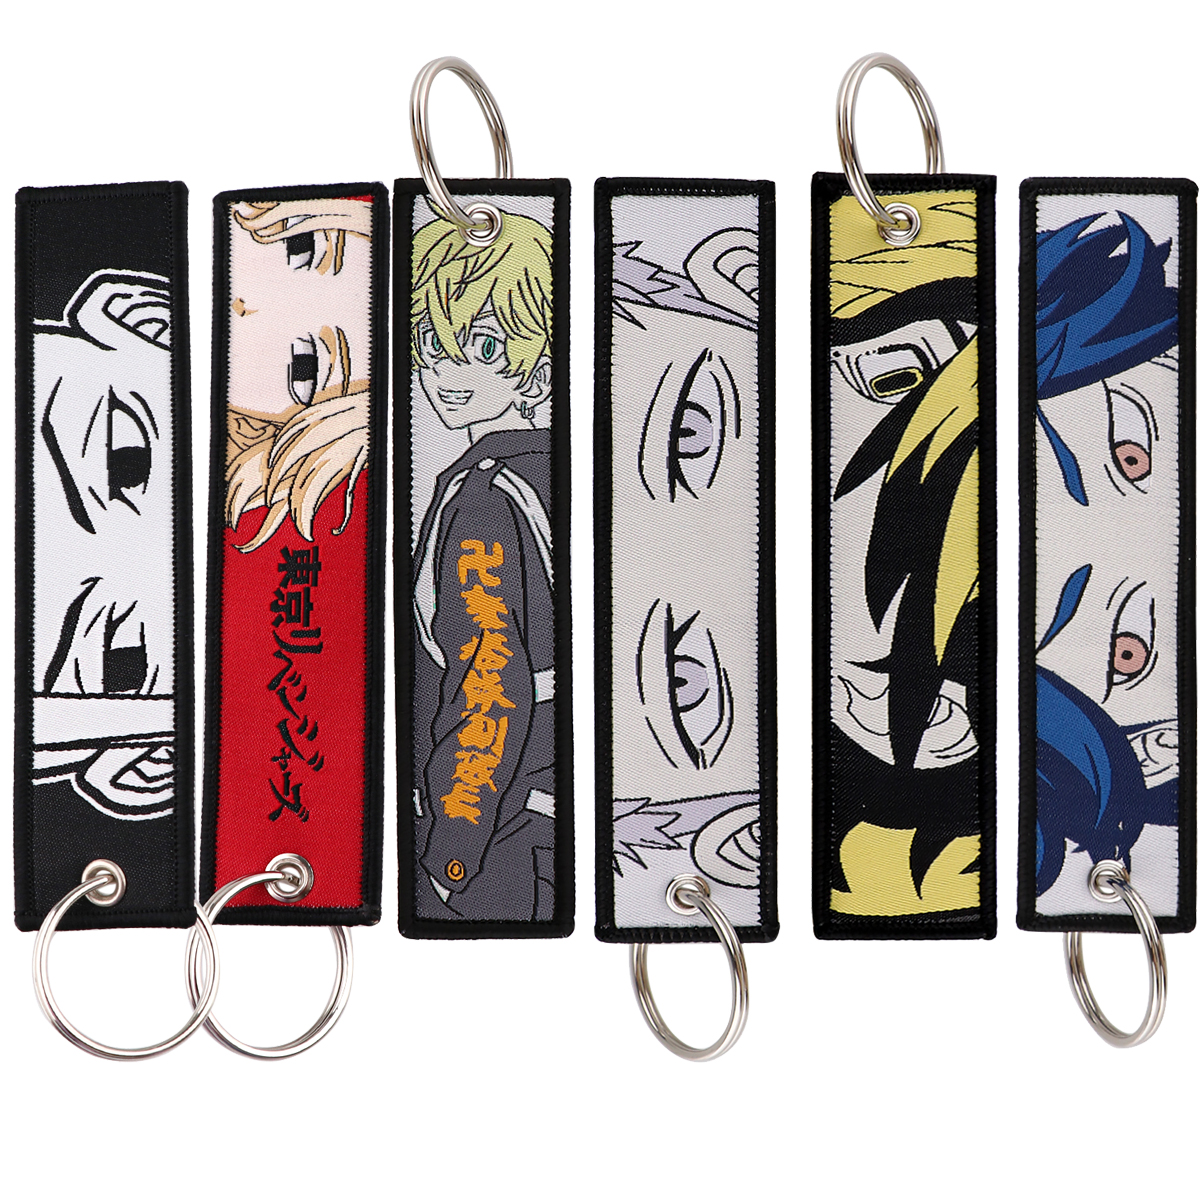 Japanese Anime Embroidered Keychain Key Tag Tokyo Revengers Key Fobs Motorcycles Cars Backpack Chaveiro Fashion Key - Tokyo Revengers Merch